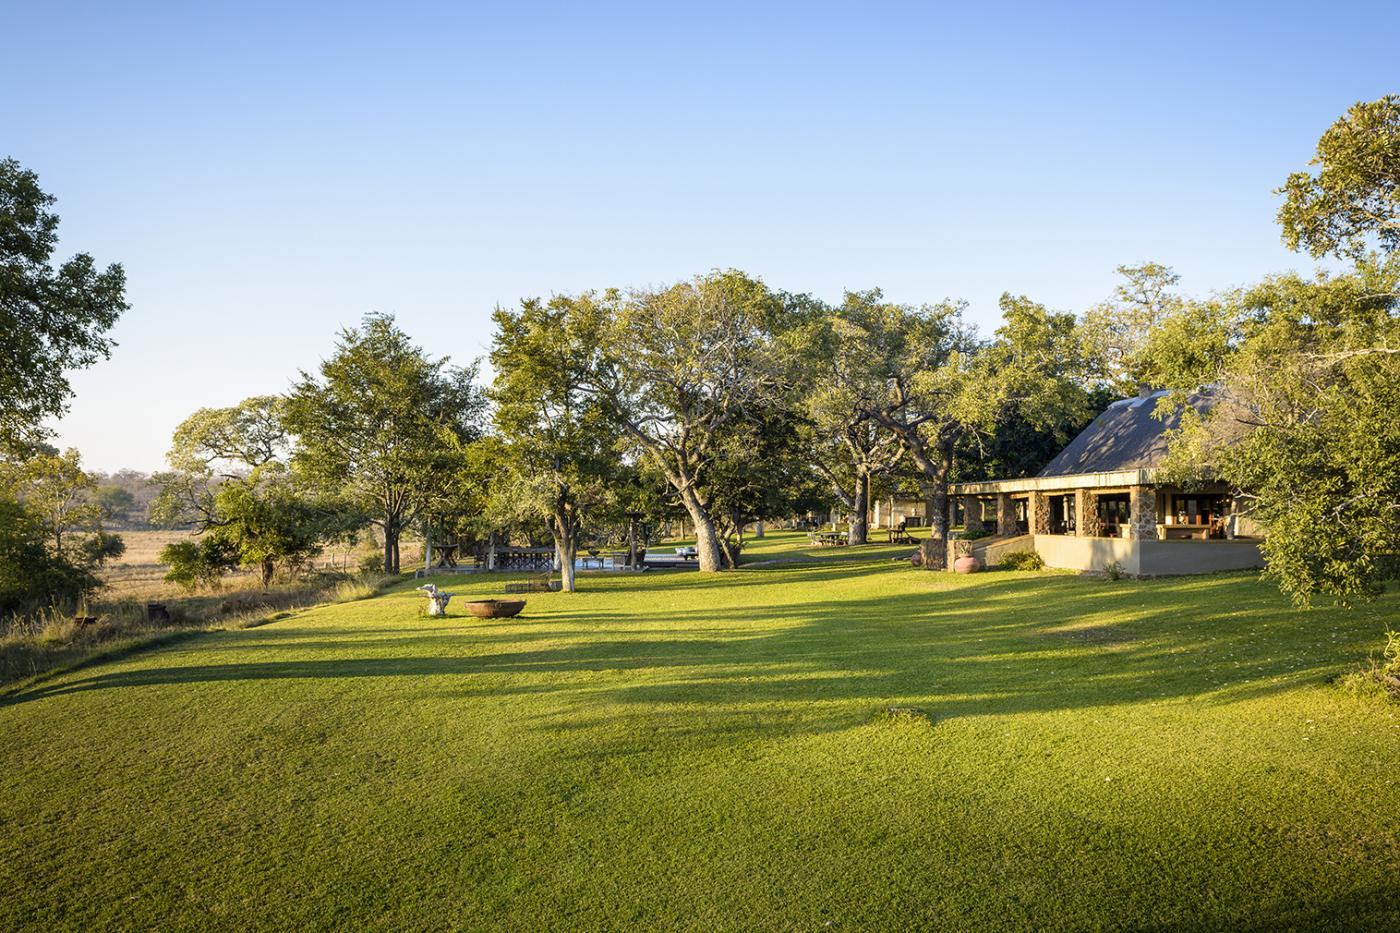 Singita Castleton in South Africa is the perfect place to bring your friends and family.